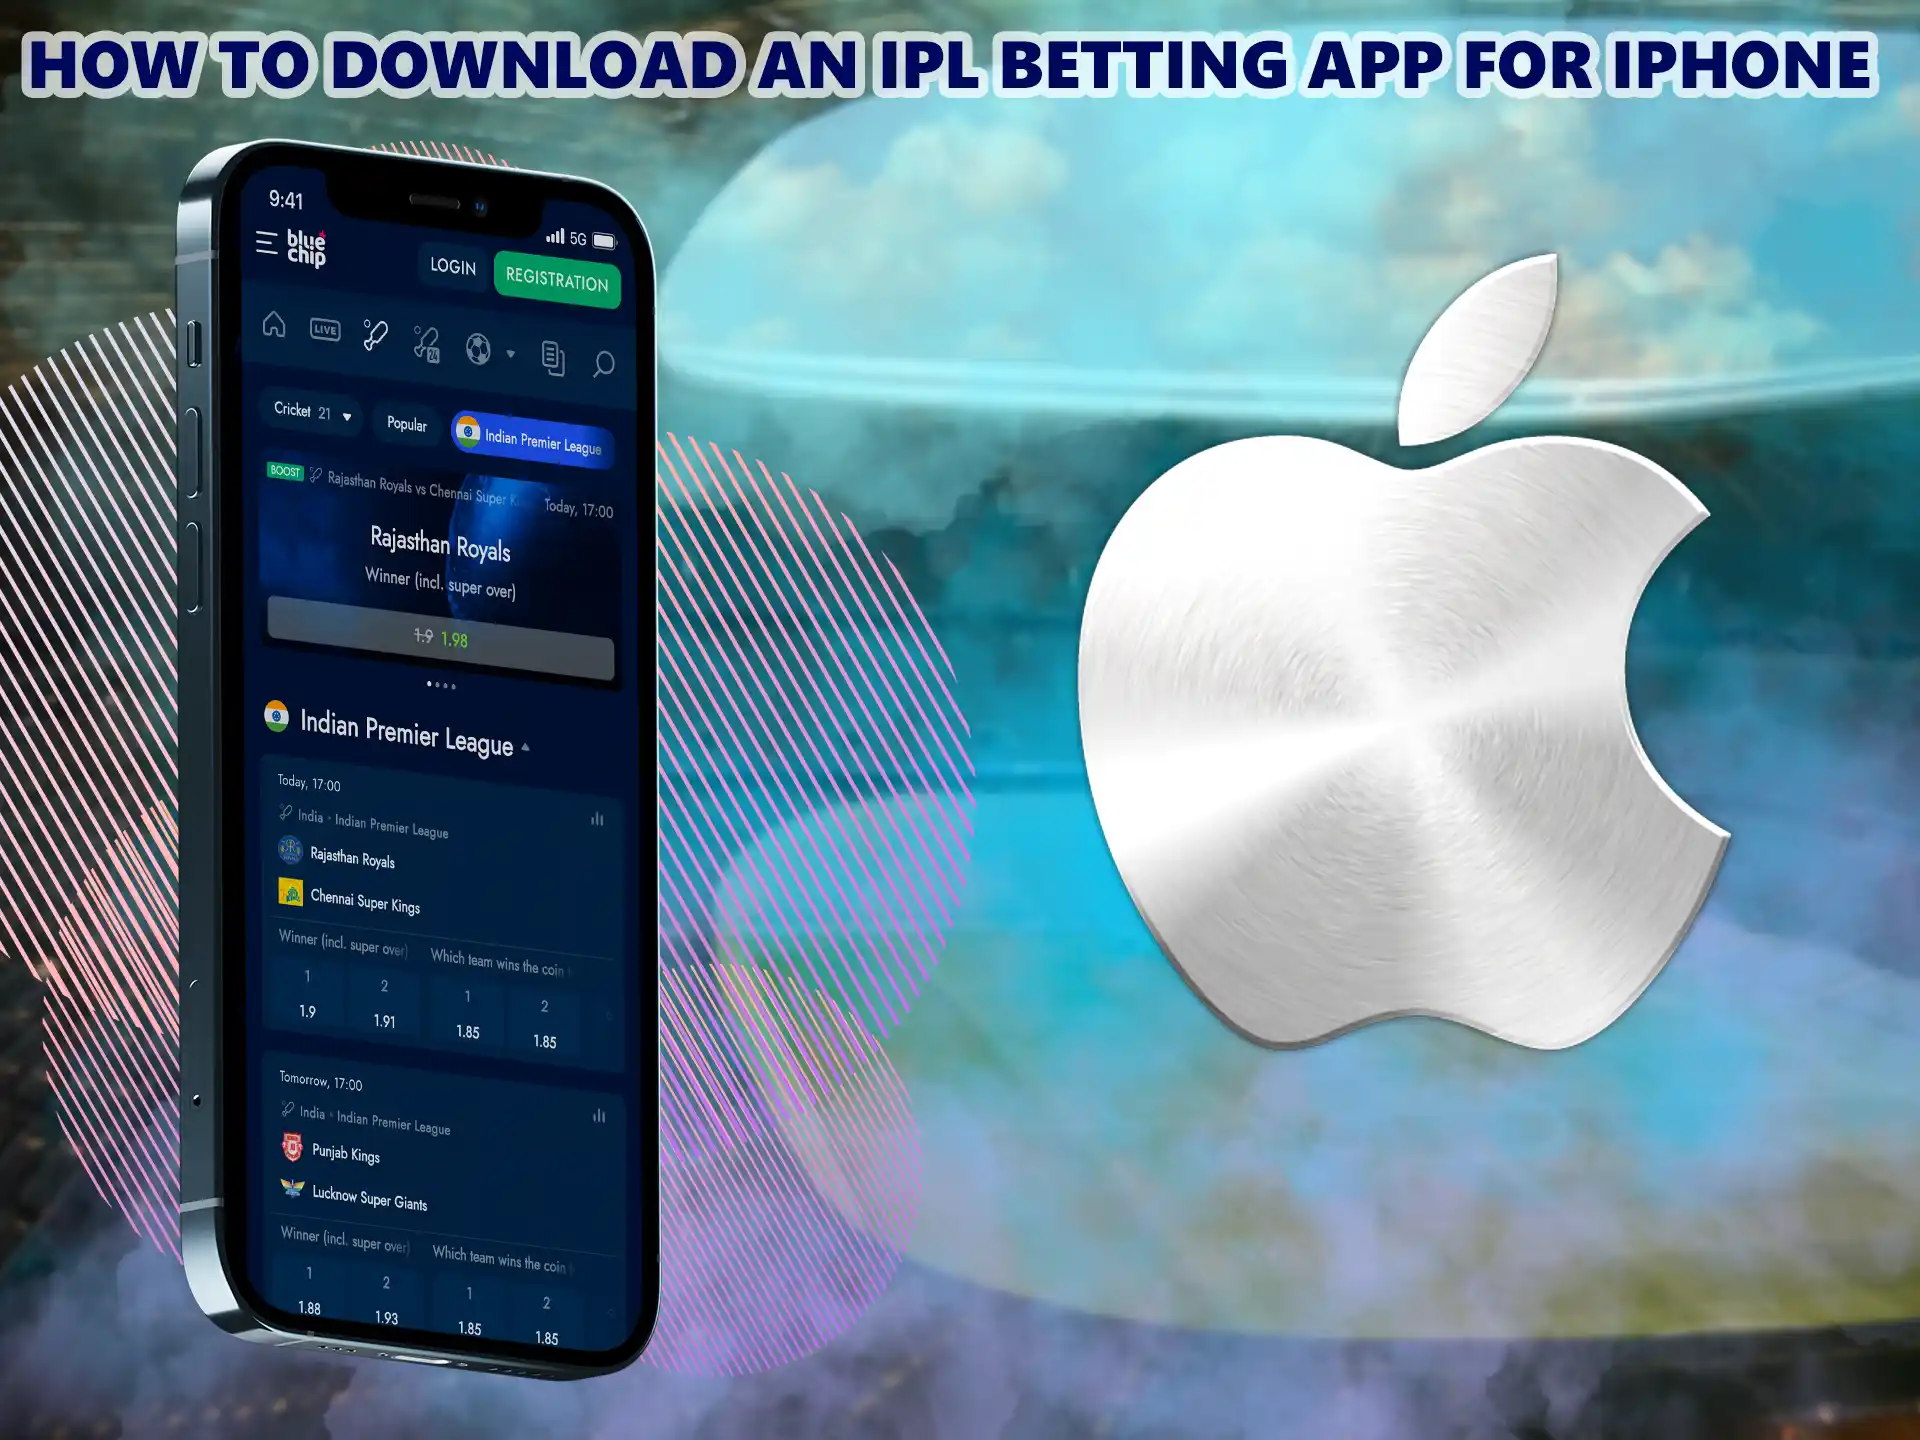 The App Store allows the installation of betting software, so you can easily install it with our detailed guide.